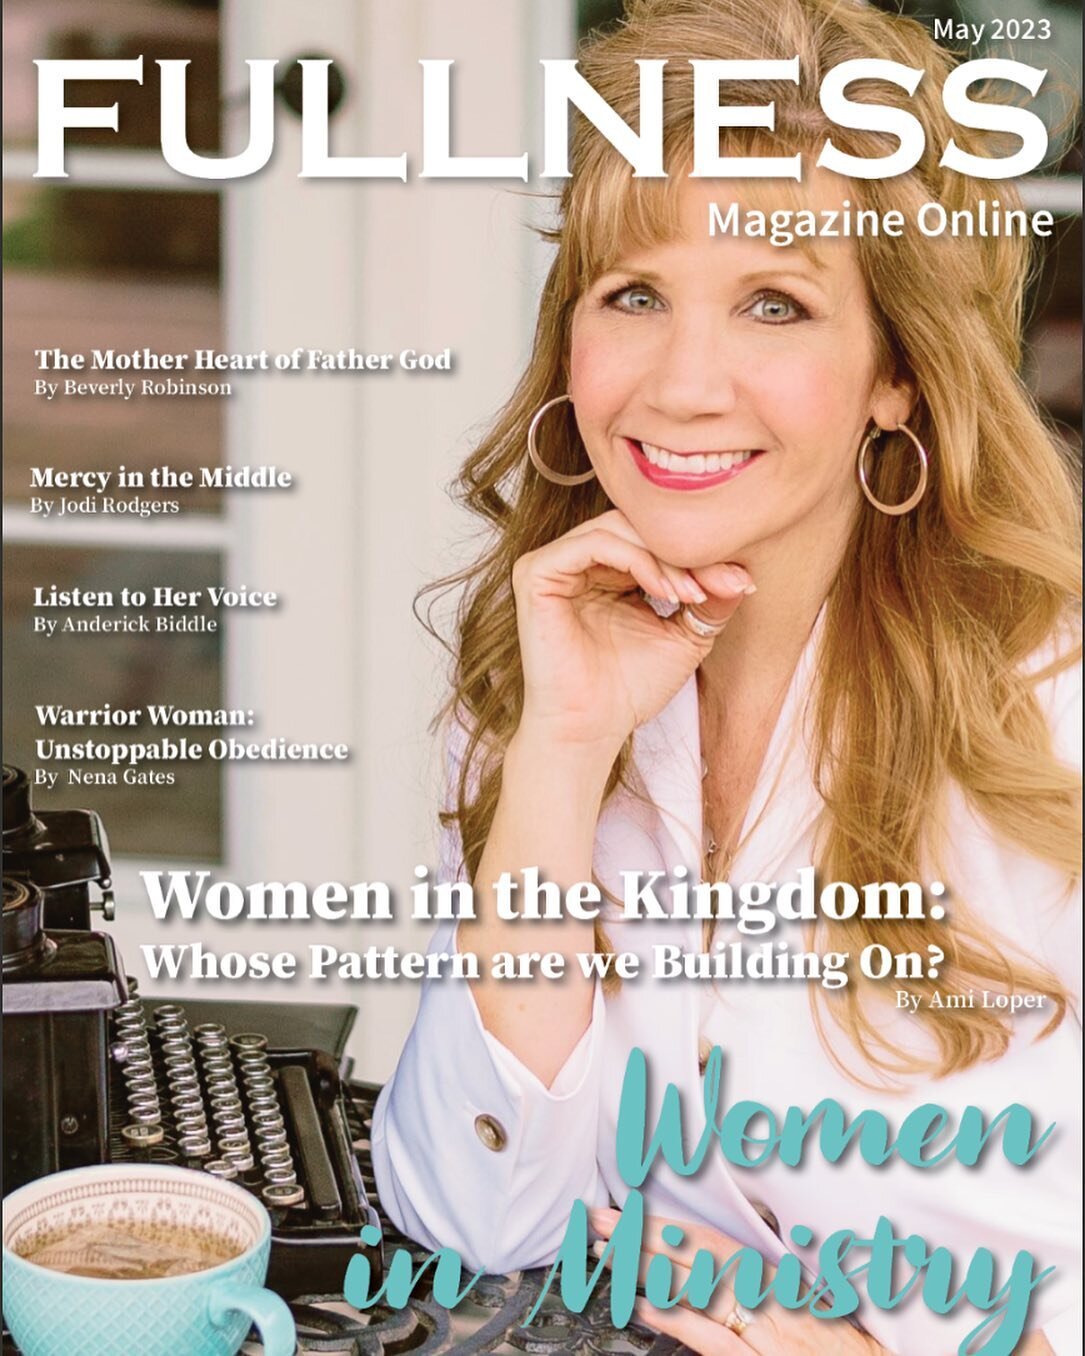 I just published an article with &quot;Fullness Magazine&quot;! I've published many articles, but this one feels extra special.

It is titled, &quot;Women in the Kingdom&quot; and examines the reasons women have been limited in their freedom to walk 